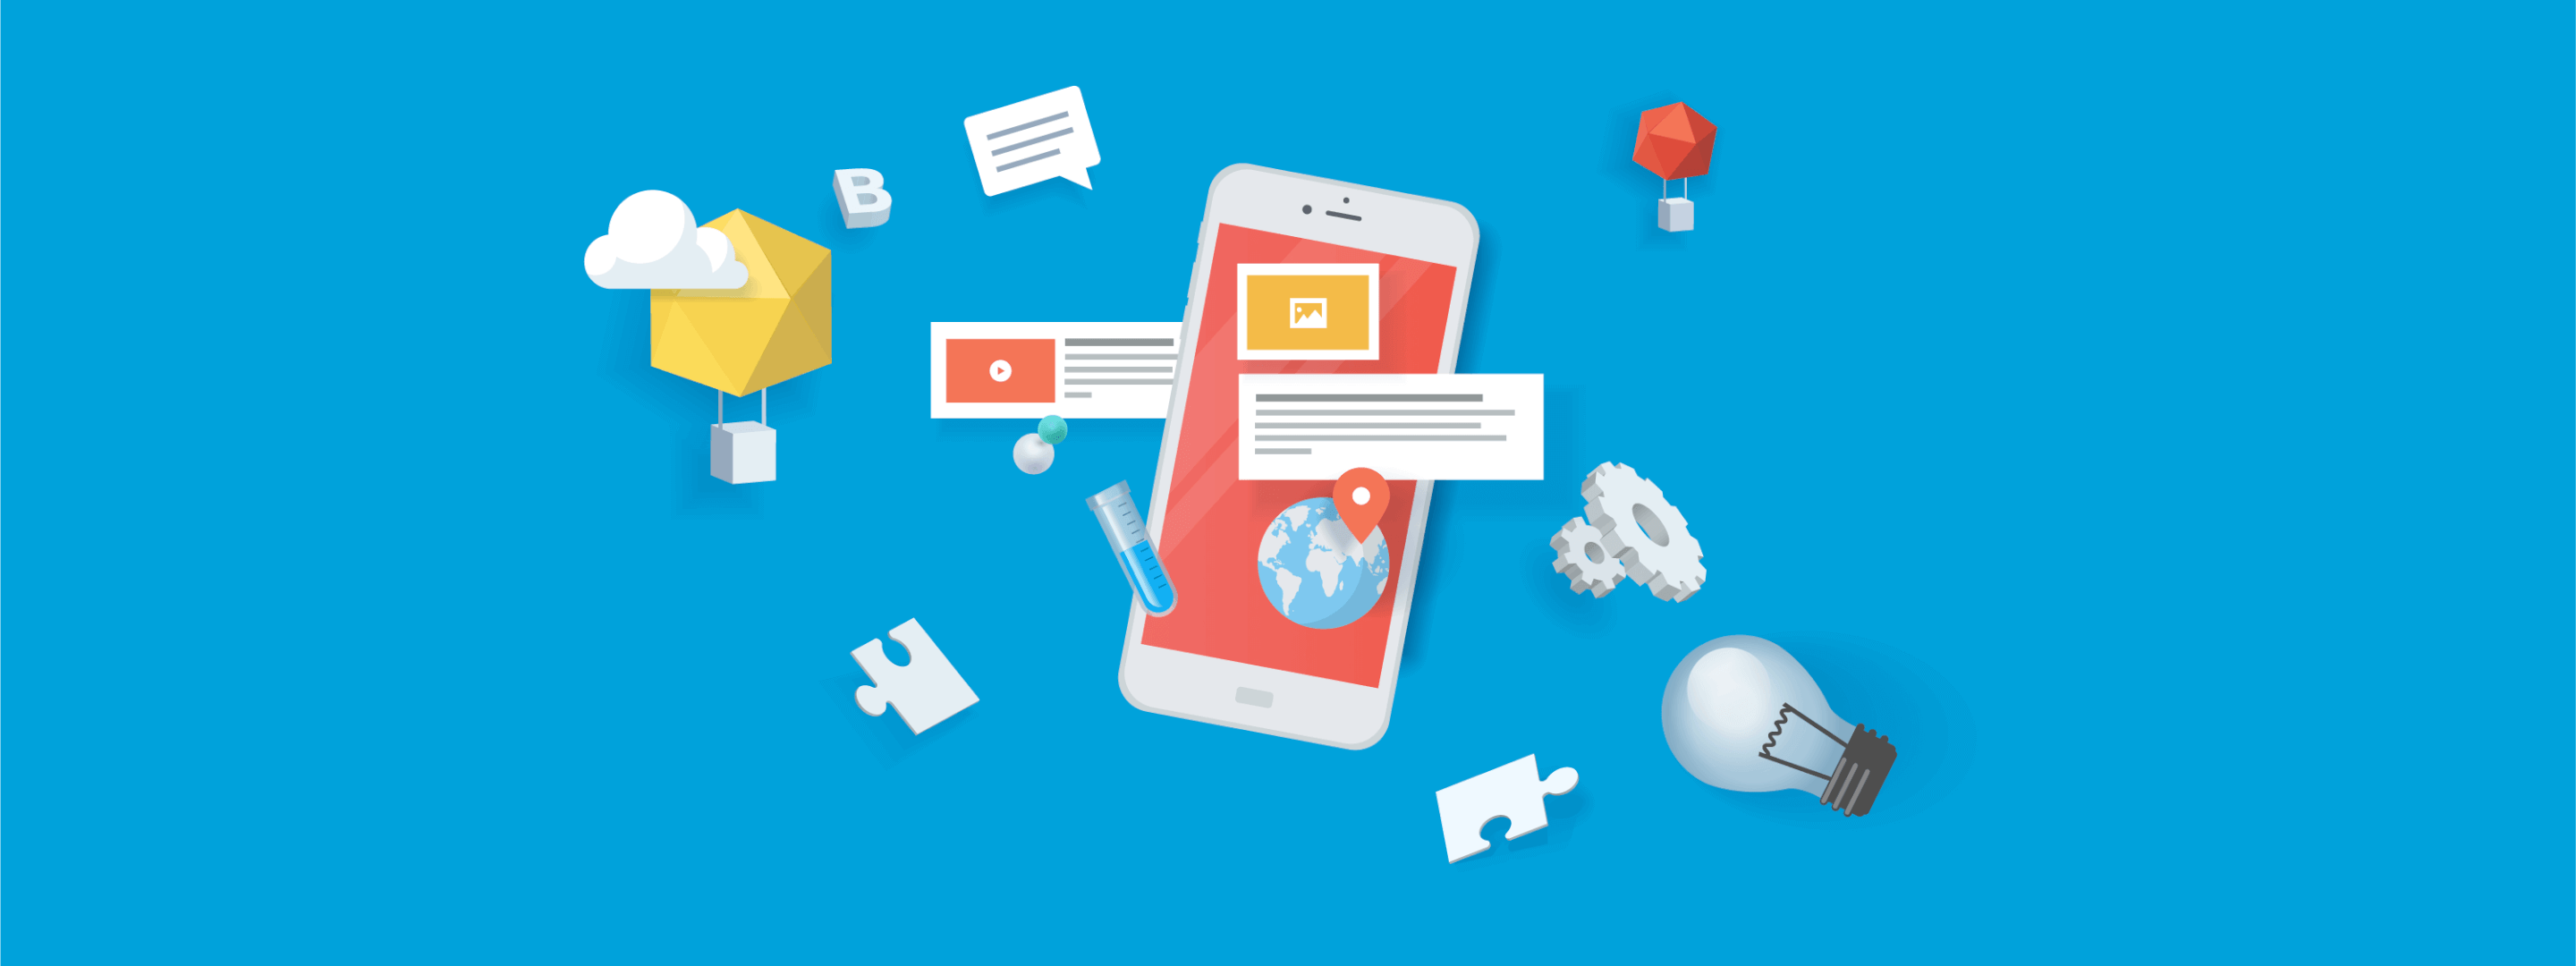 5 Elements Of A Successful Mobile App